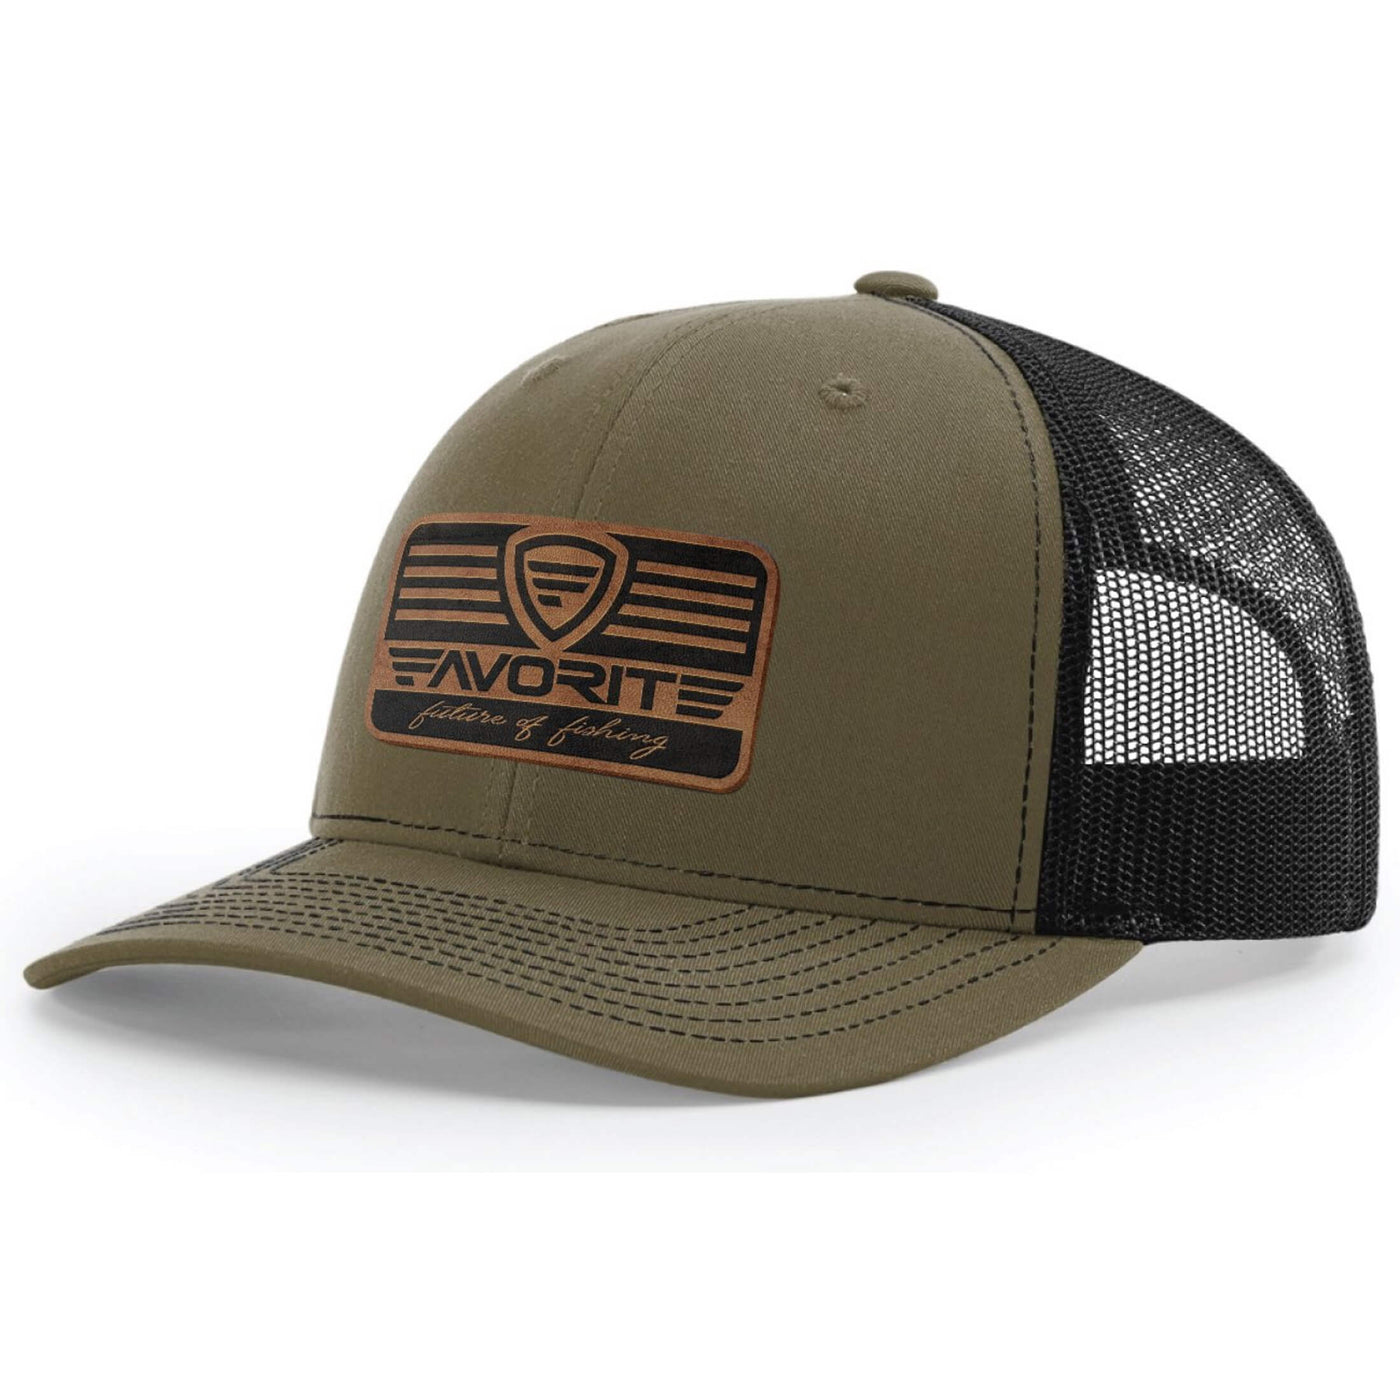 Franchise Leather Patch Hat | Favorite Fishing Loden/Black